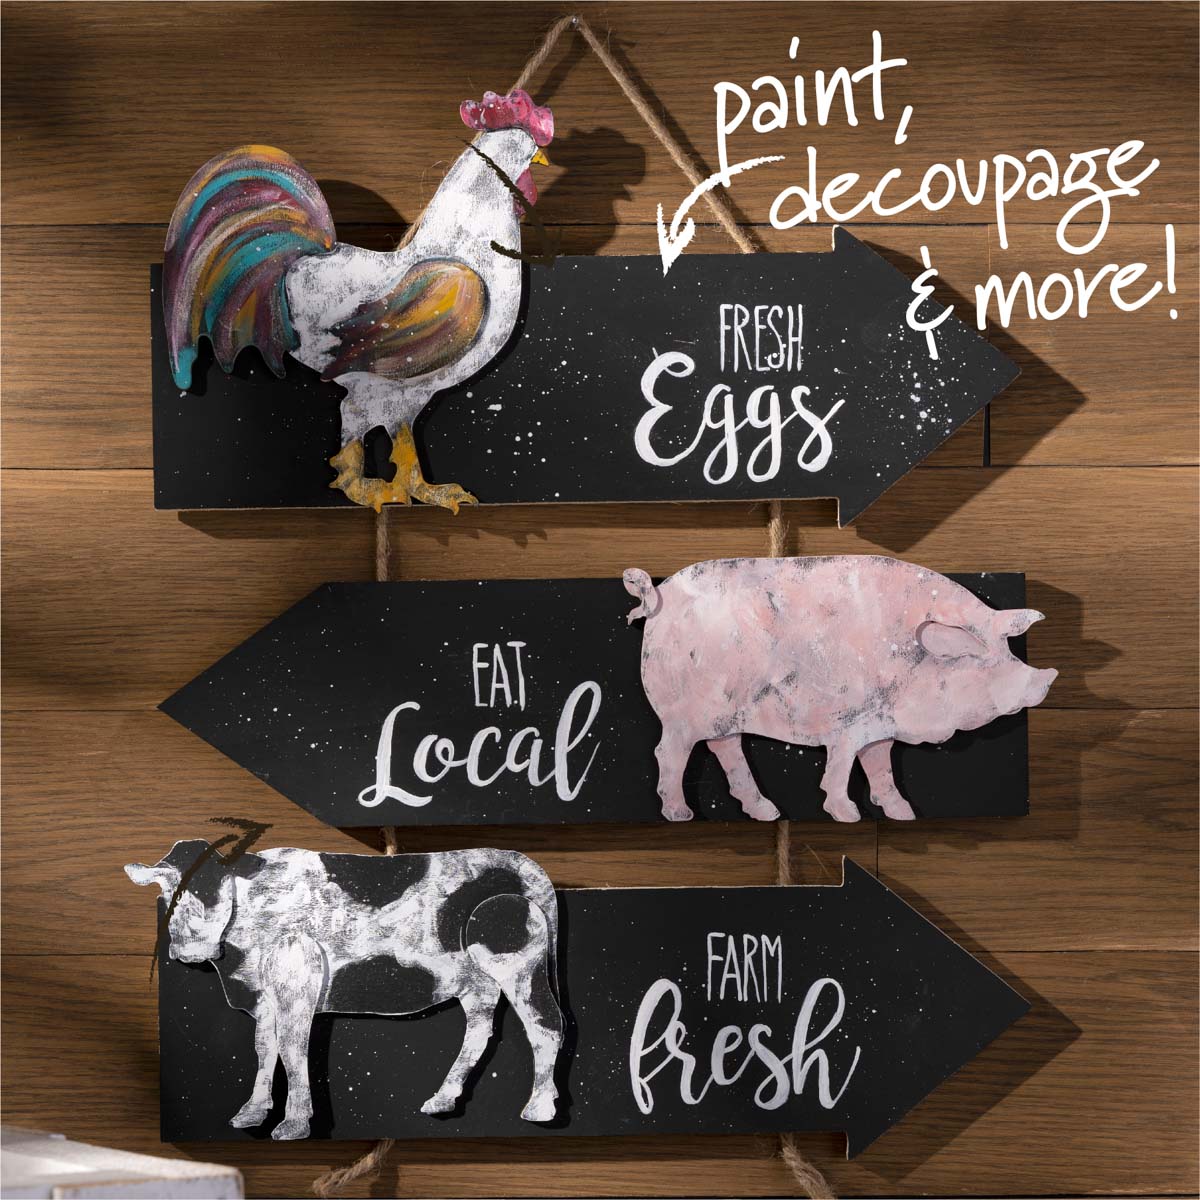 Plaid ® Wood Surfaces - Directional Sign, Arrows - 63404